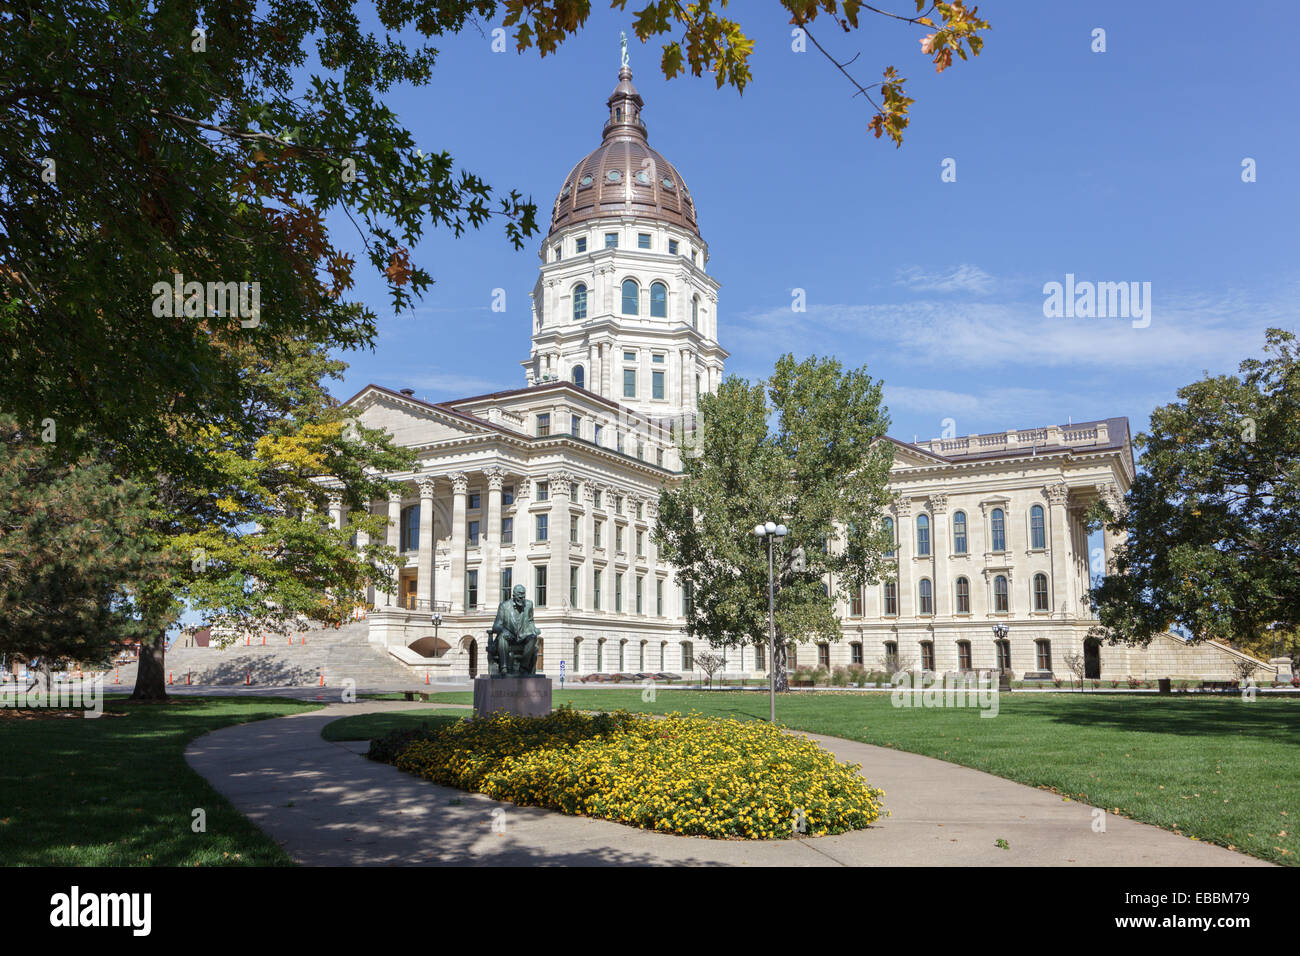 Kansas State Capitol, Topeka, completed 1903, architect John Haskell, limestone, copper dome, taller than US Capitol. Stock Photo